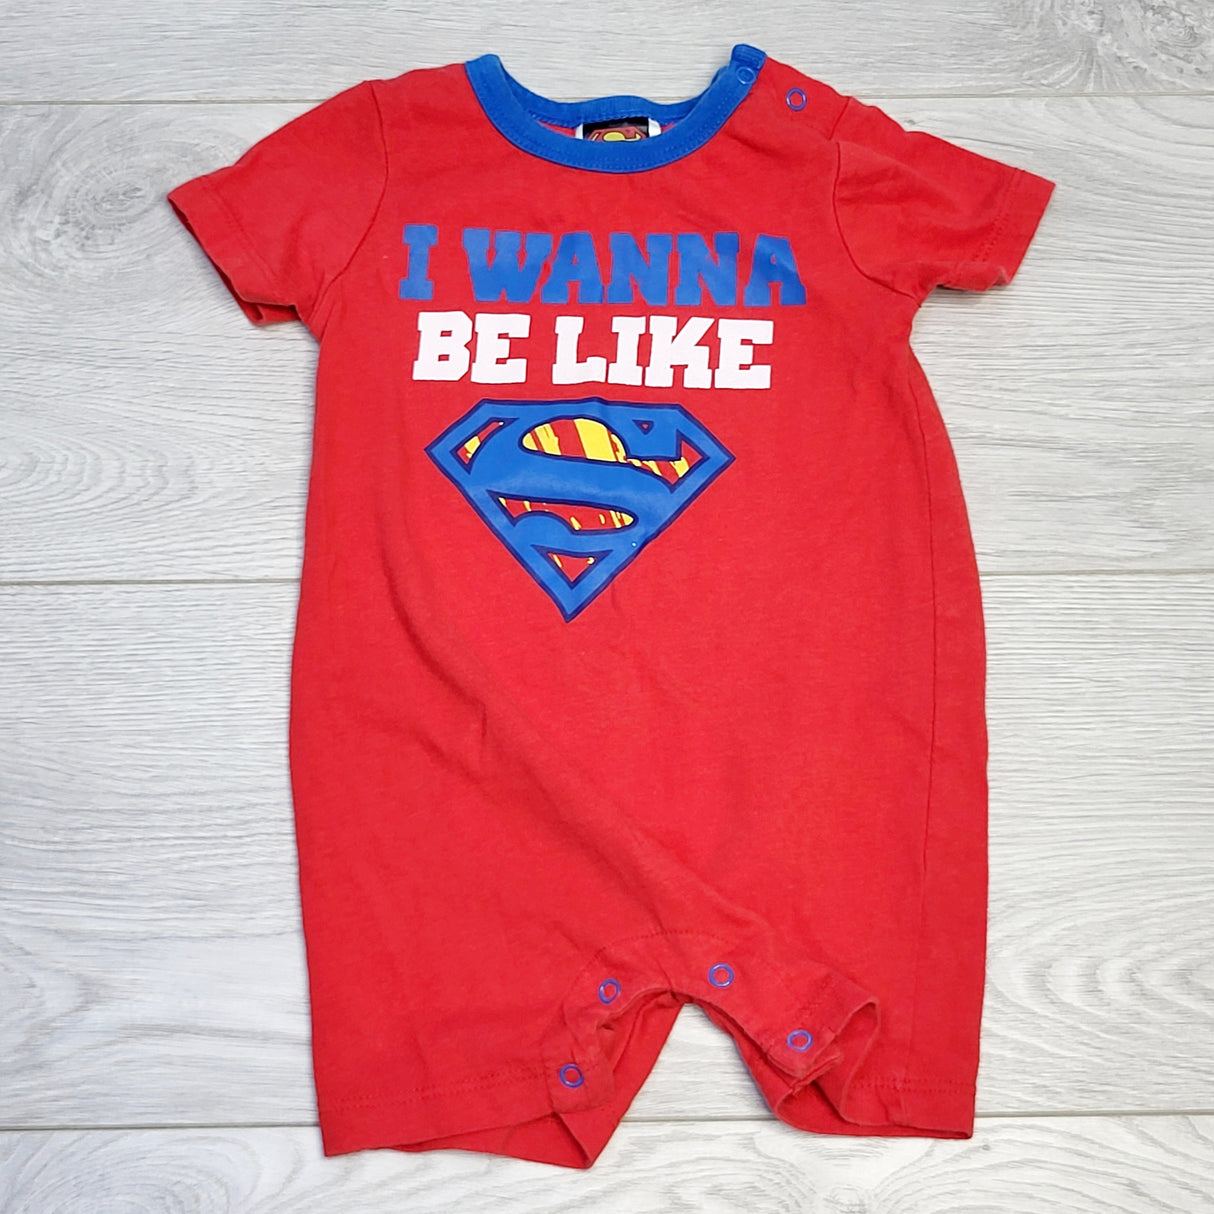 CHOL1 - Red and blue Superman cotton romper, size 3-6 months